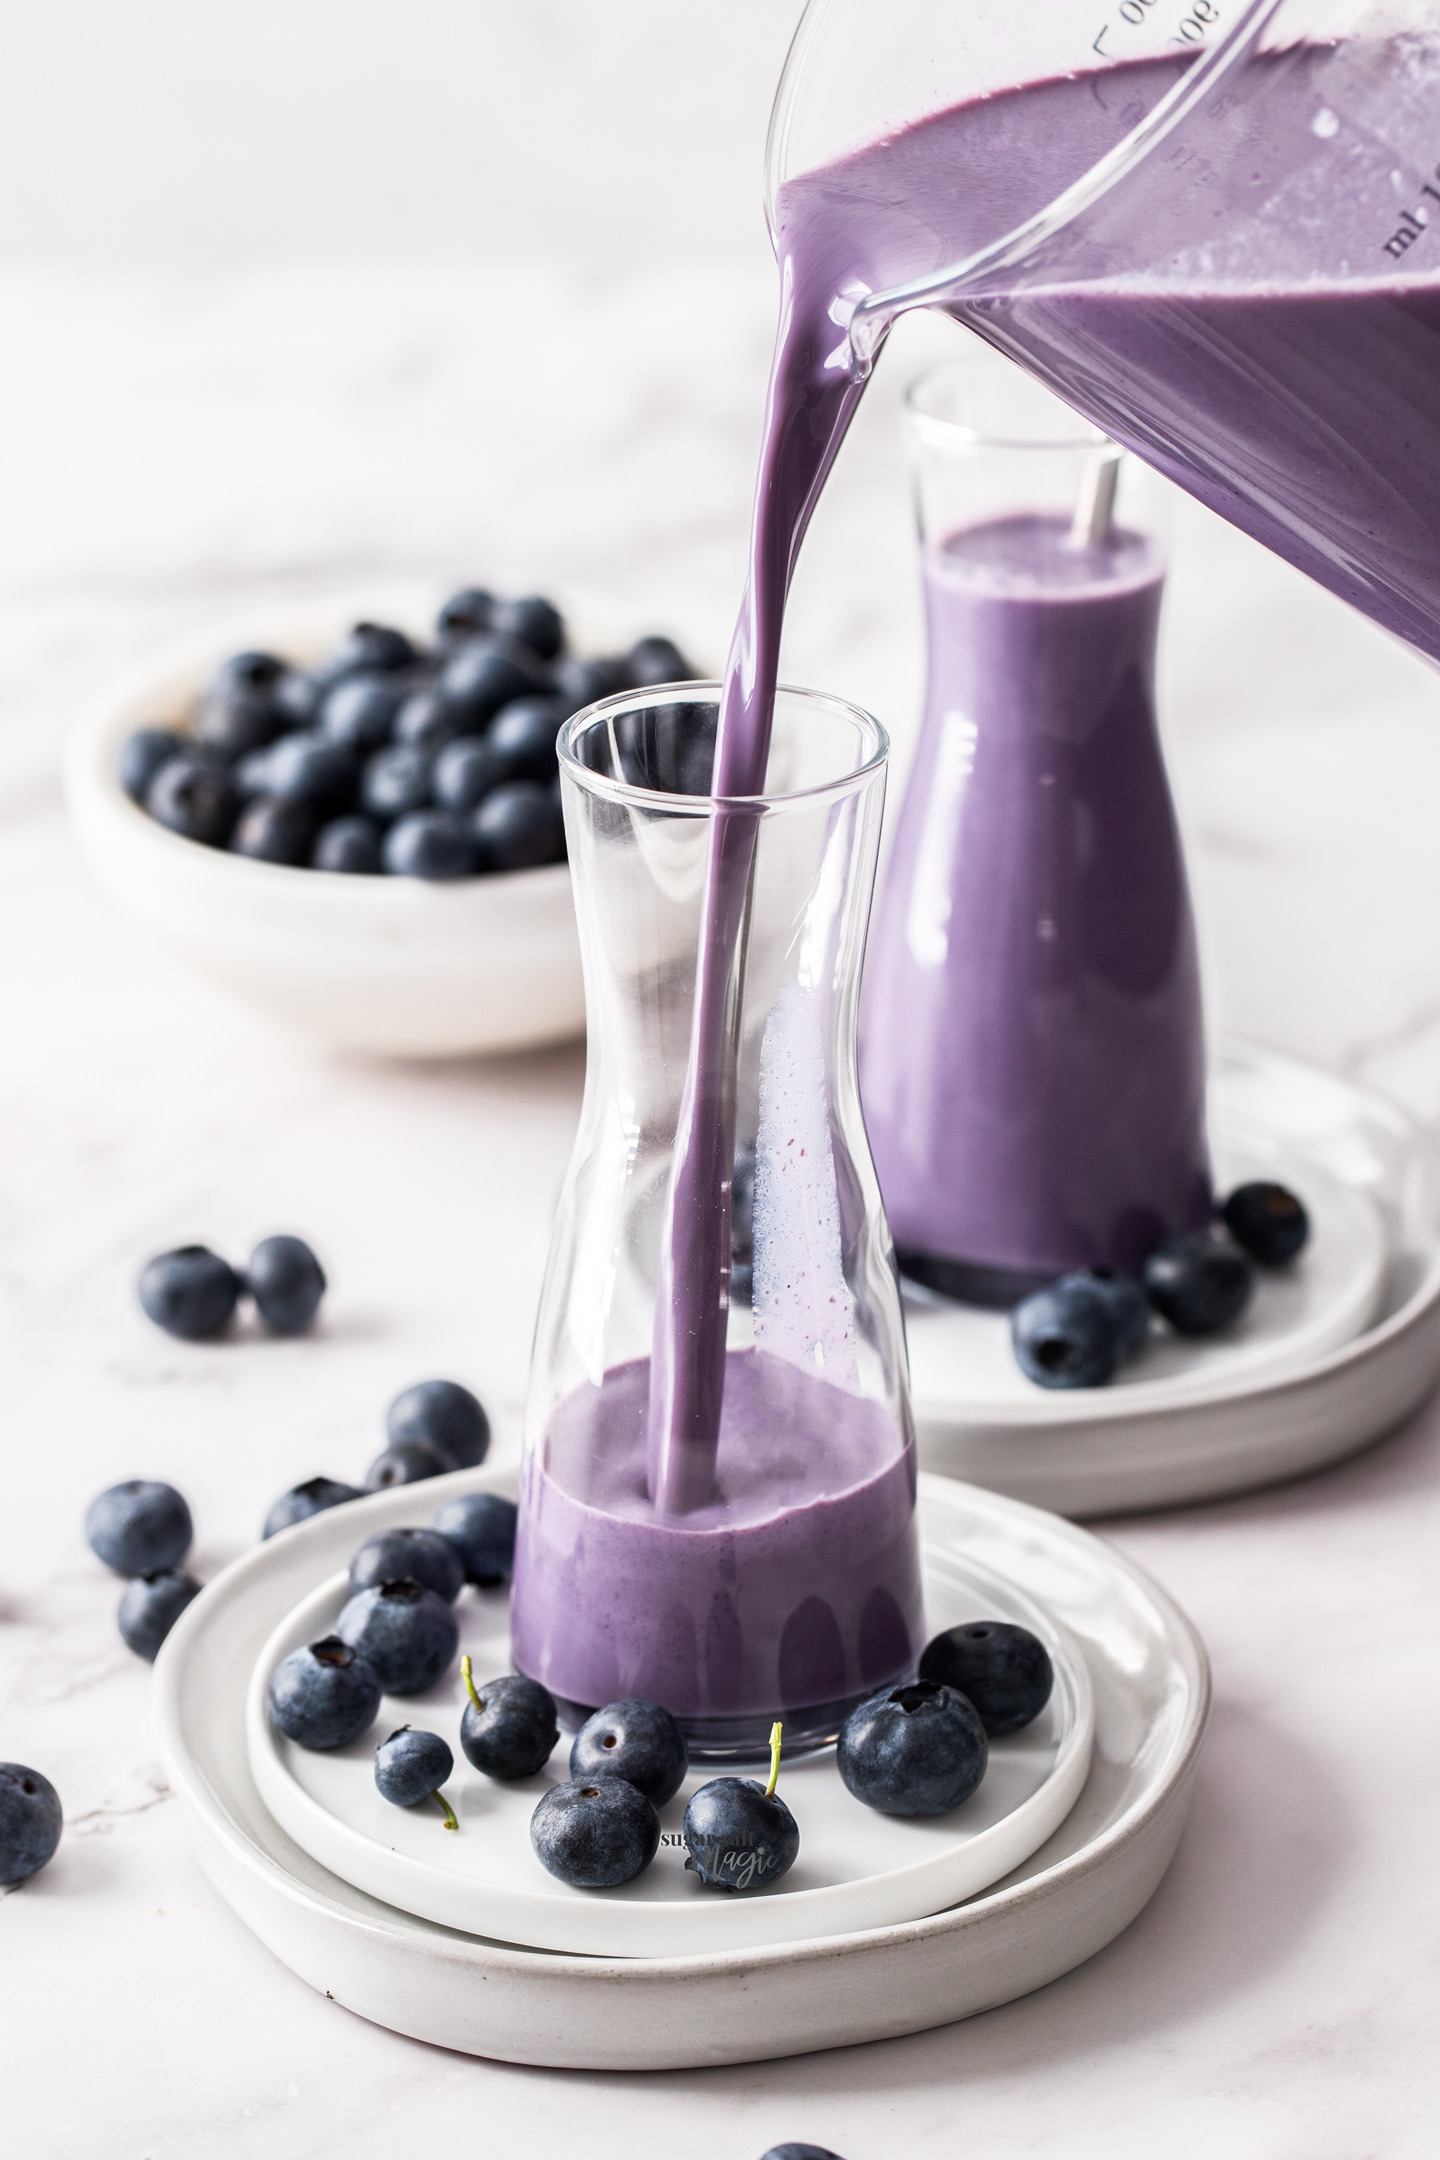 A tall glass being filled with blueberry milk.